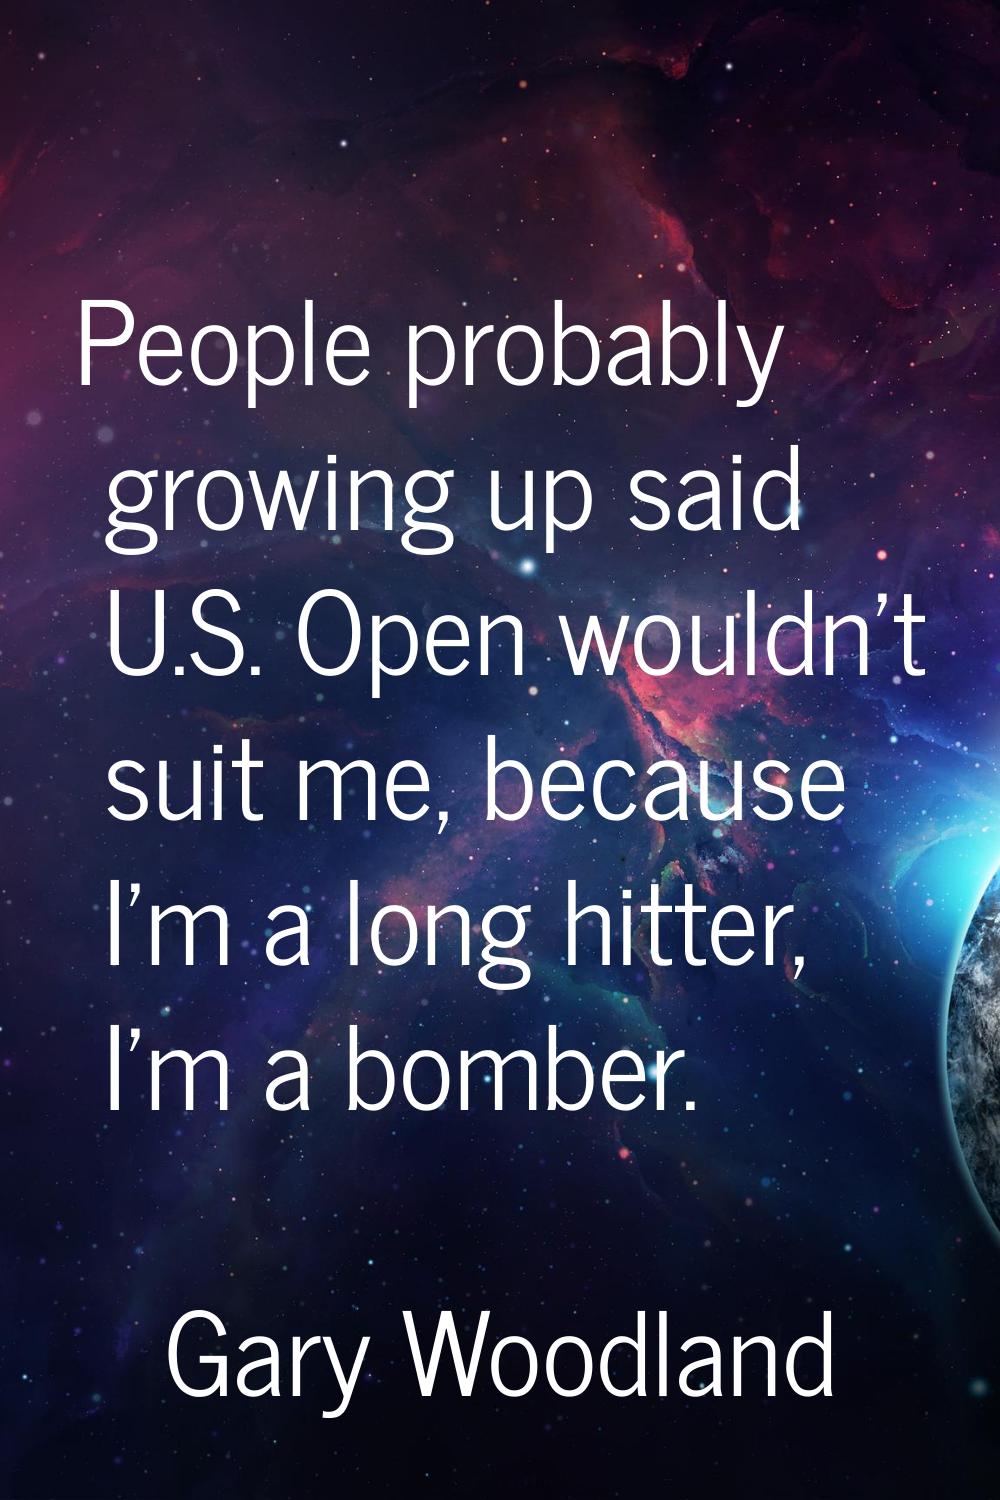 People probably growing up said U.S. Open wouldn't suit me, because I'm a long hitter, I'm a bomber